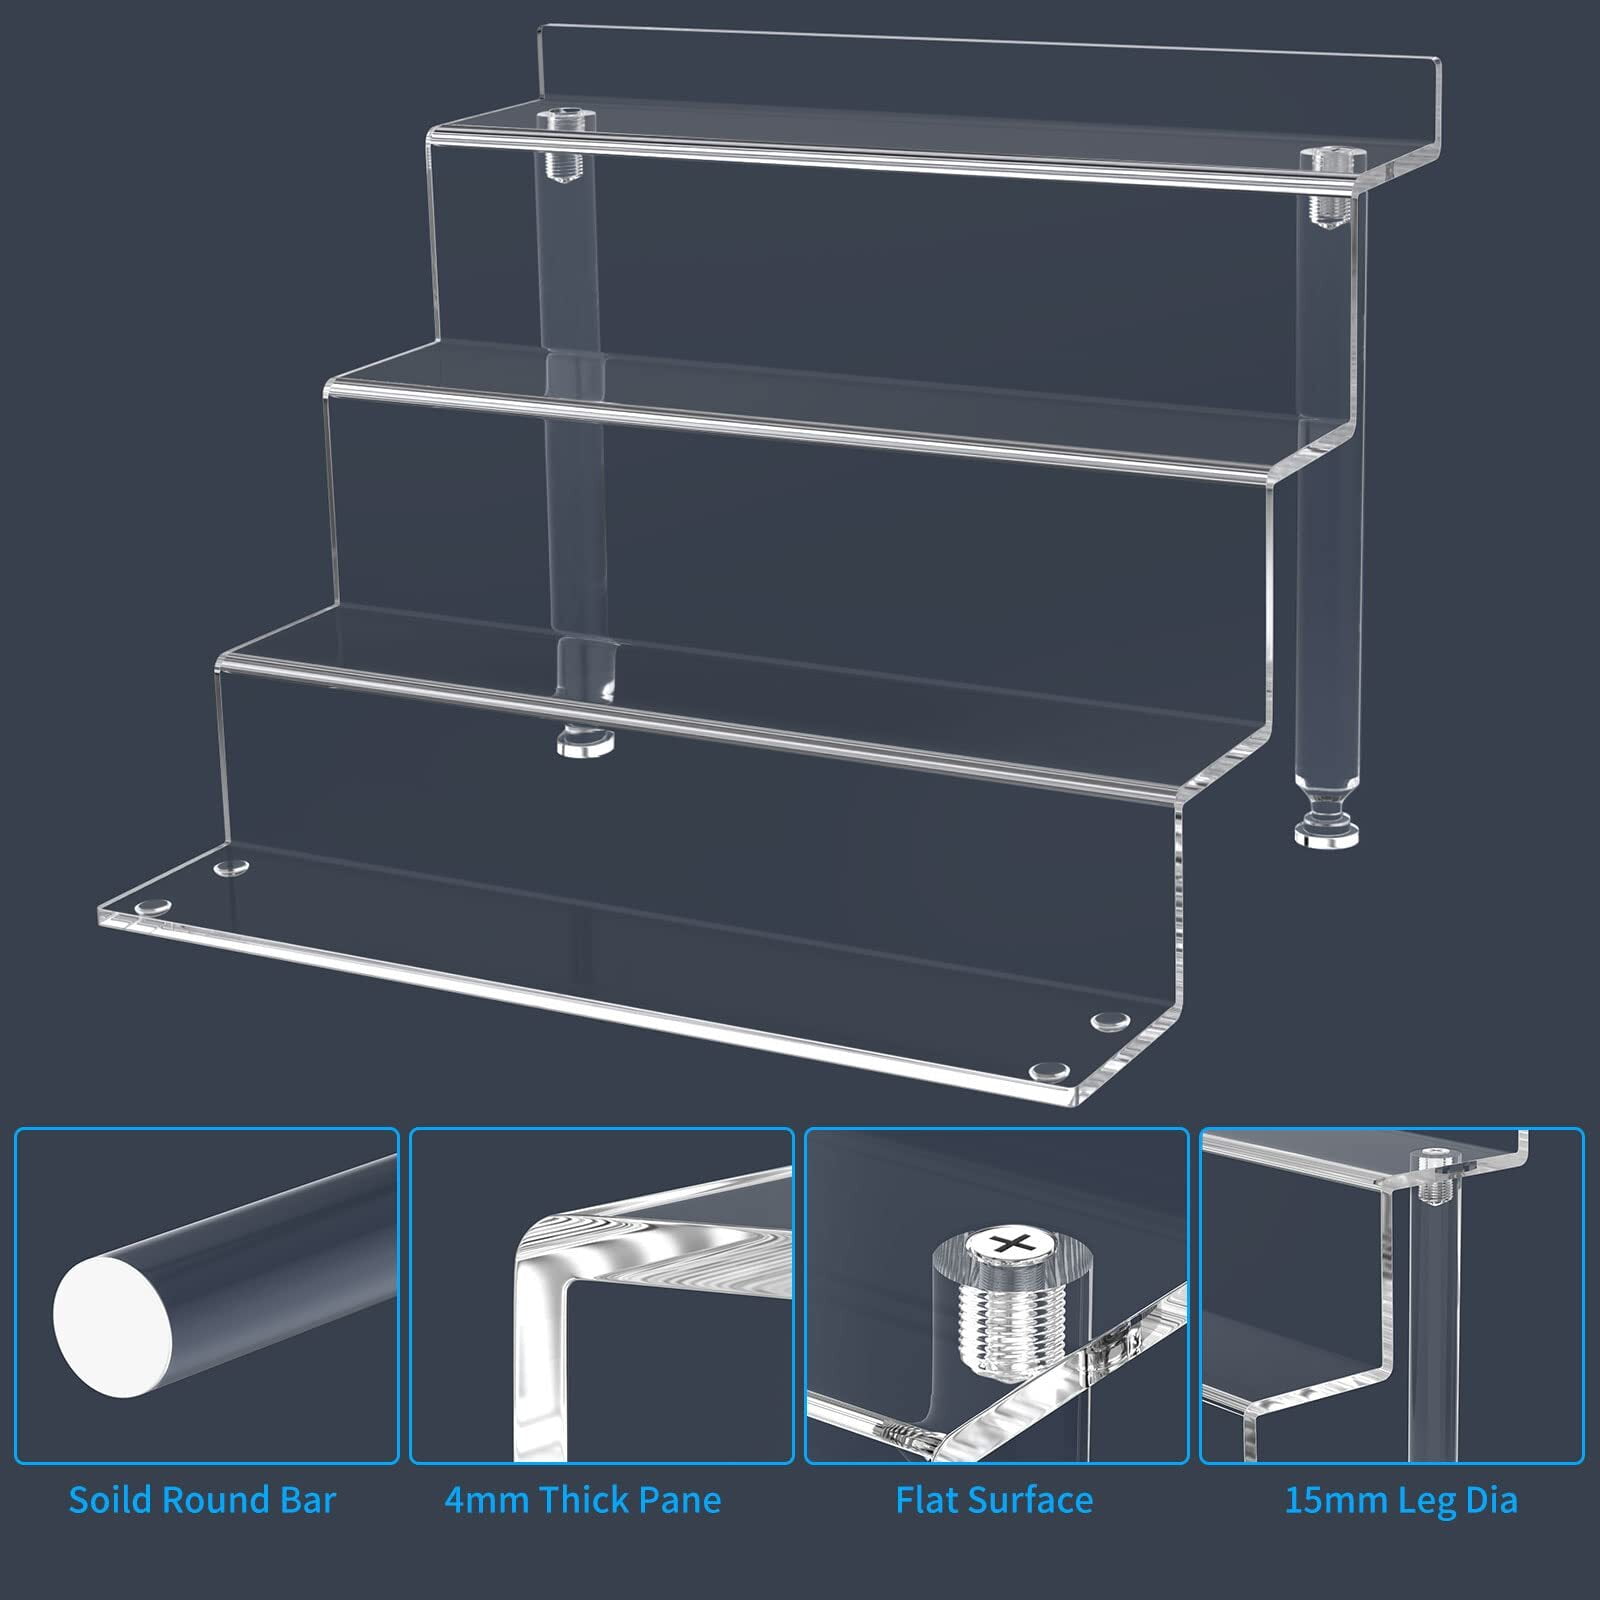 Sam & Nala Acrylic Shelf Sticker Display, Sticker Holder Display Rack,  Crystal Clear Shelves a ndRailing to Provide Maximum Visibility for Your